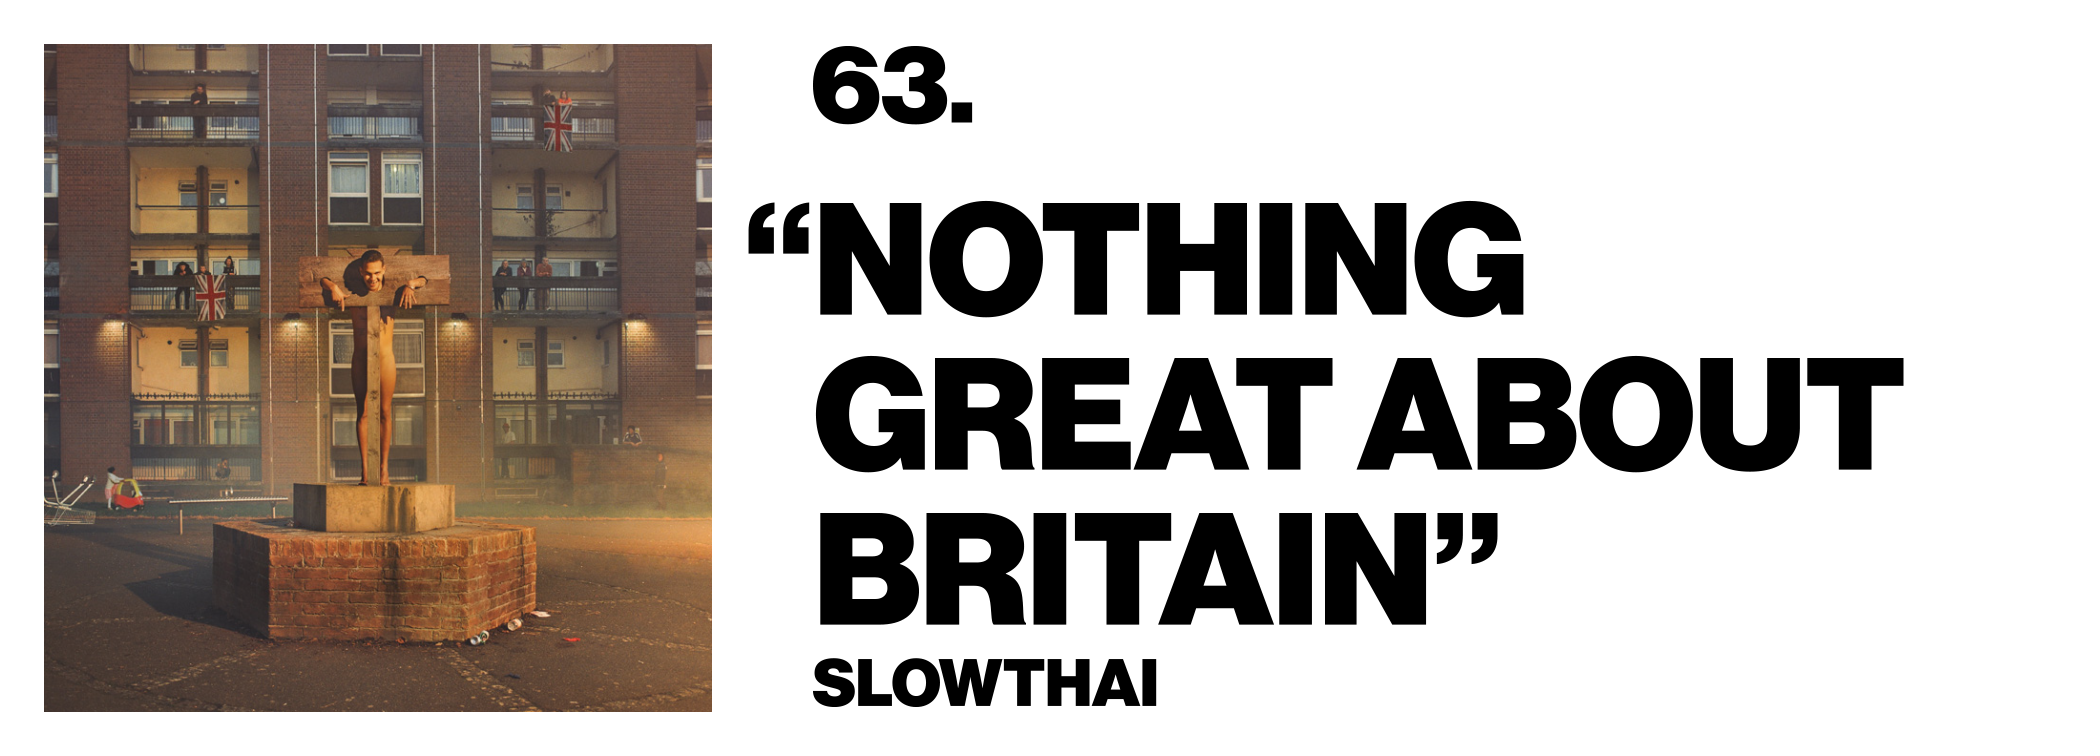 1576621950690-63-Slowthai-Nothing-Great-About-Britain